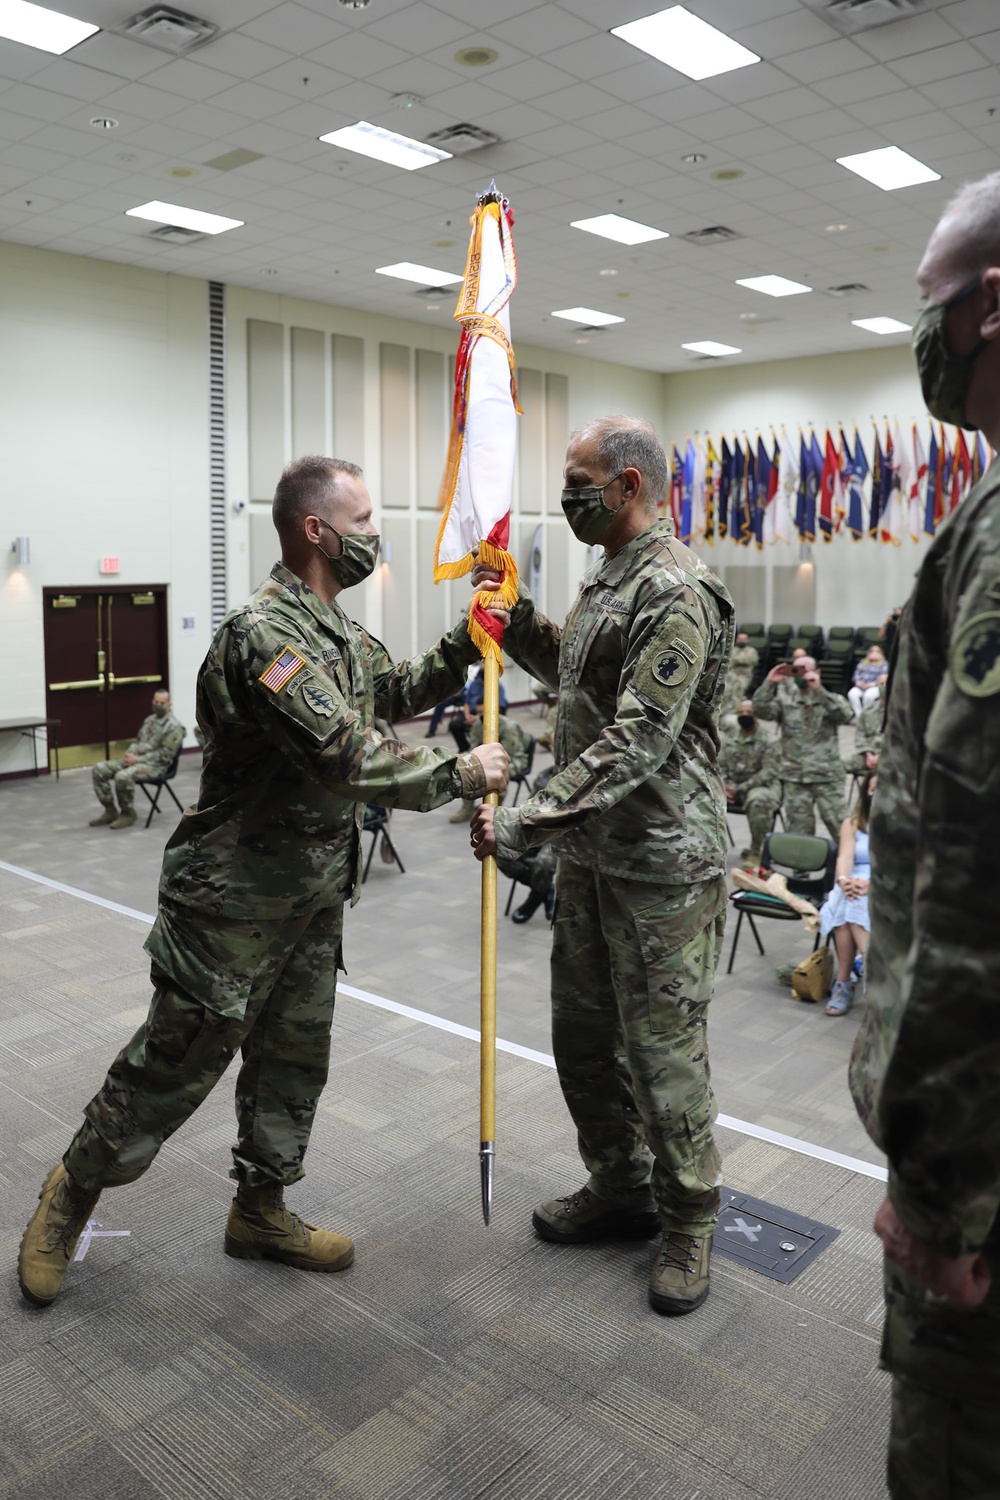 U.S. Army South Welcomes New Command Sergeant Major